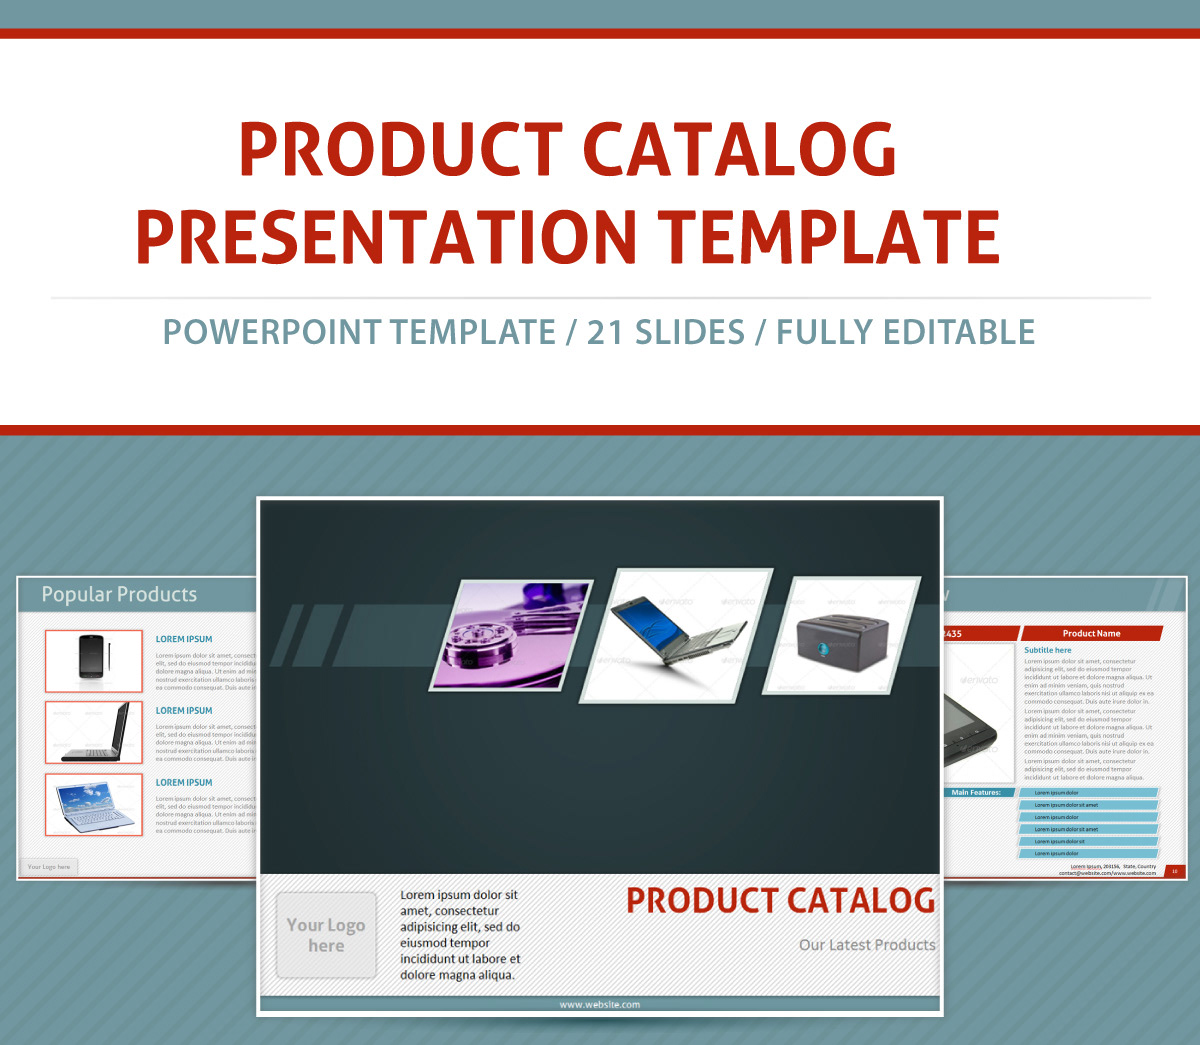 how to make a presentation for a product